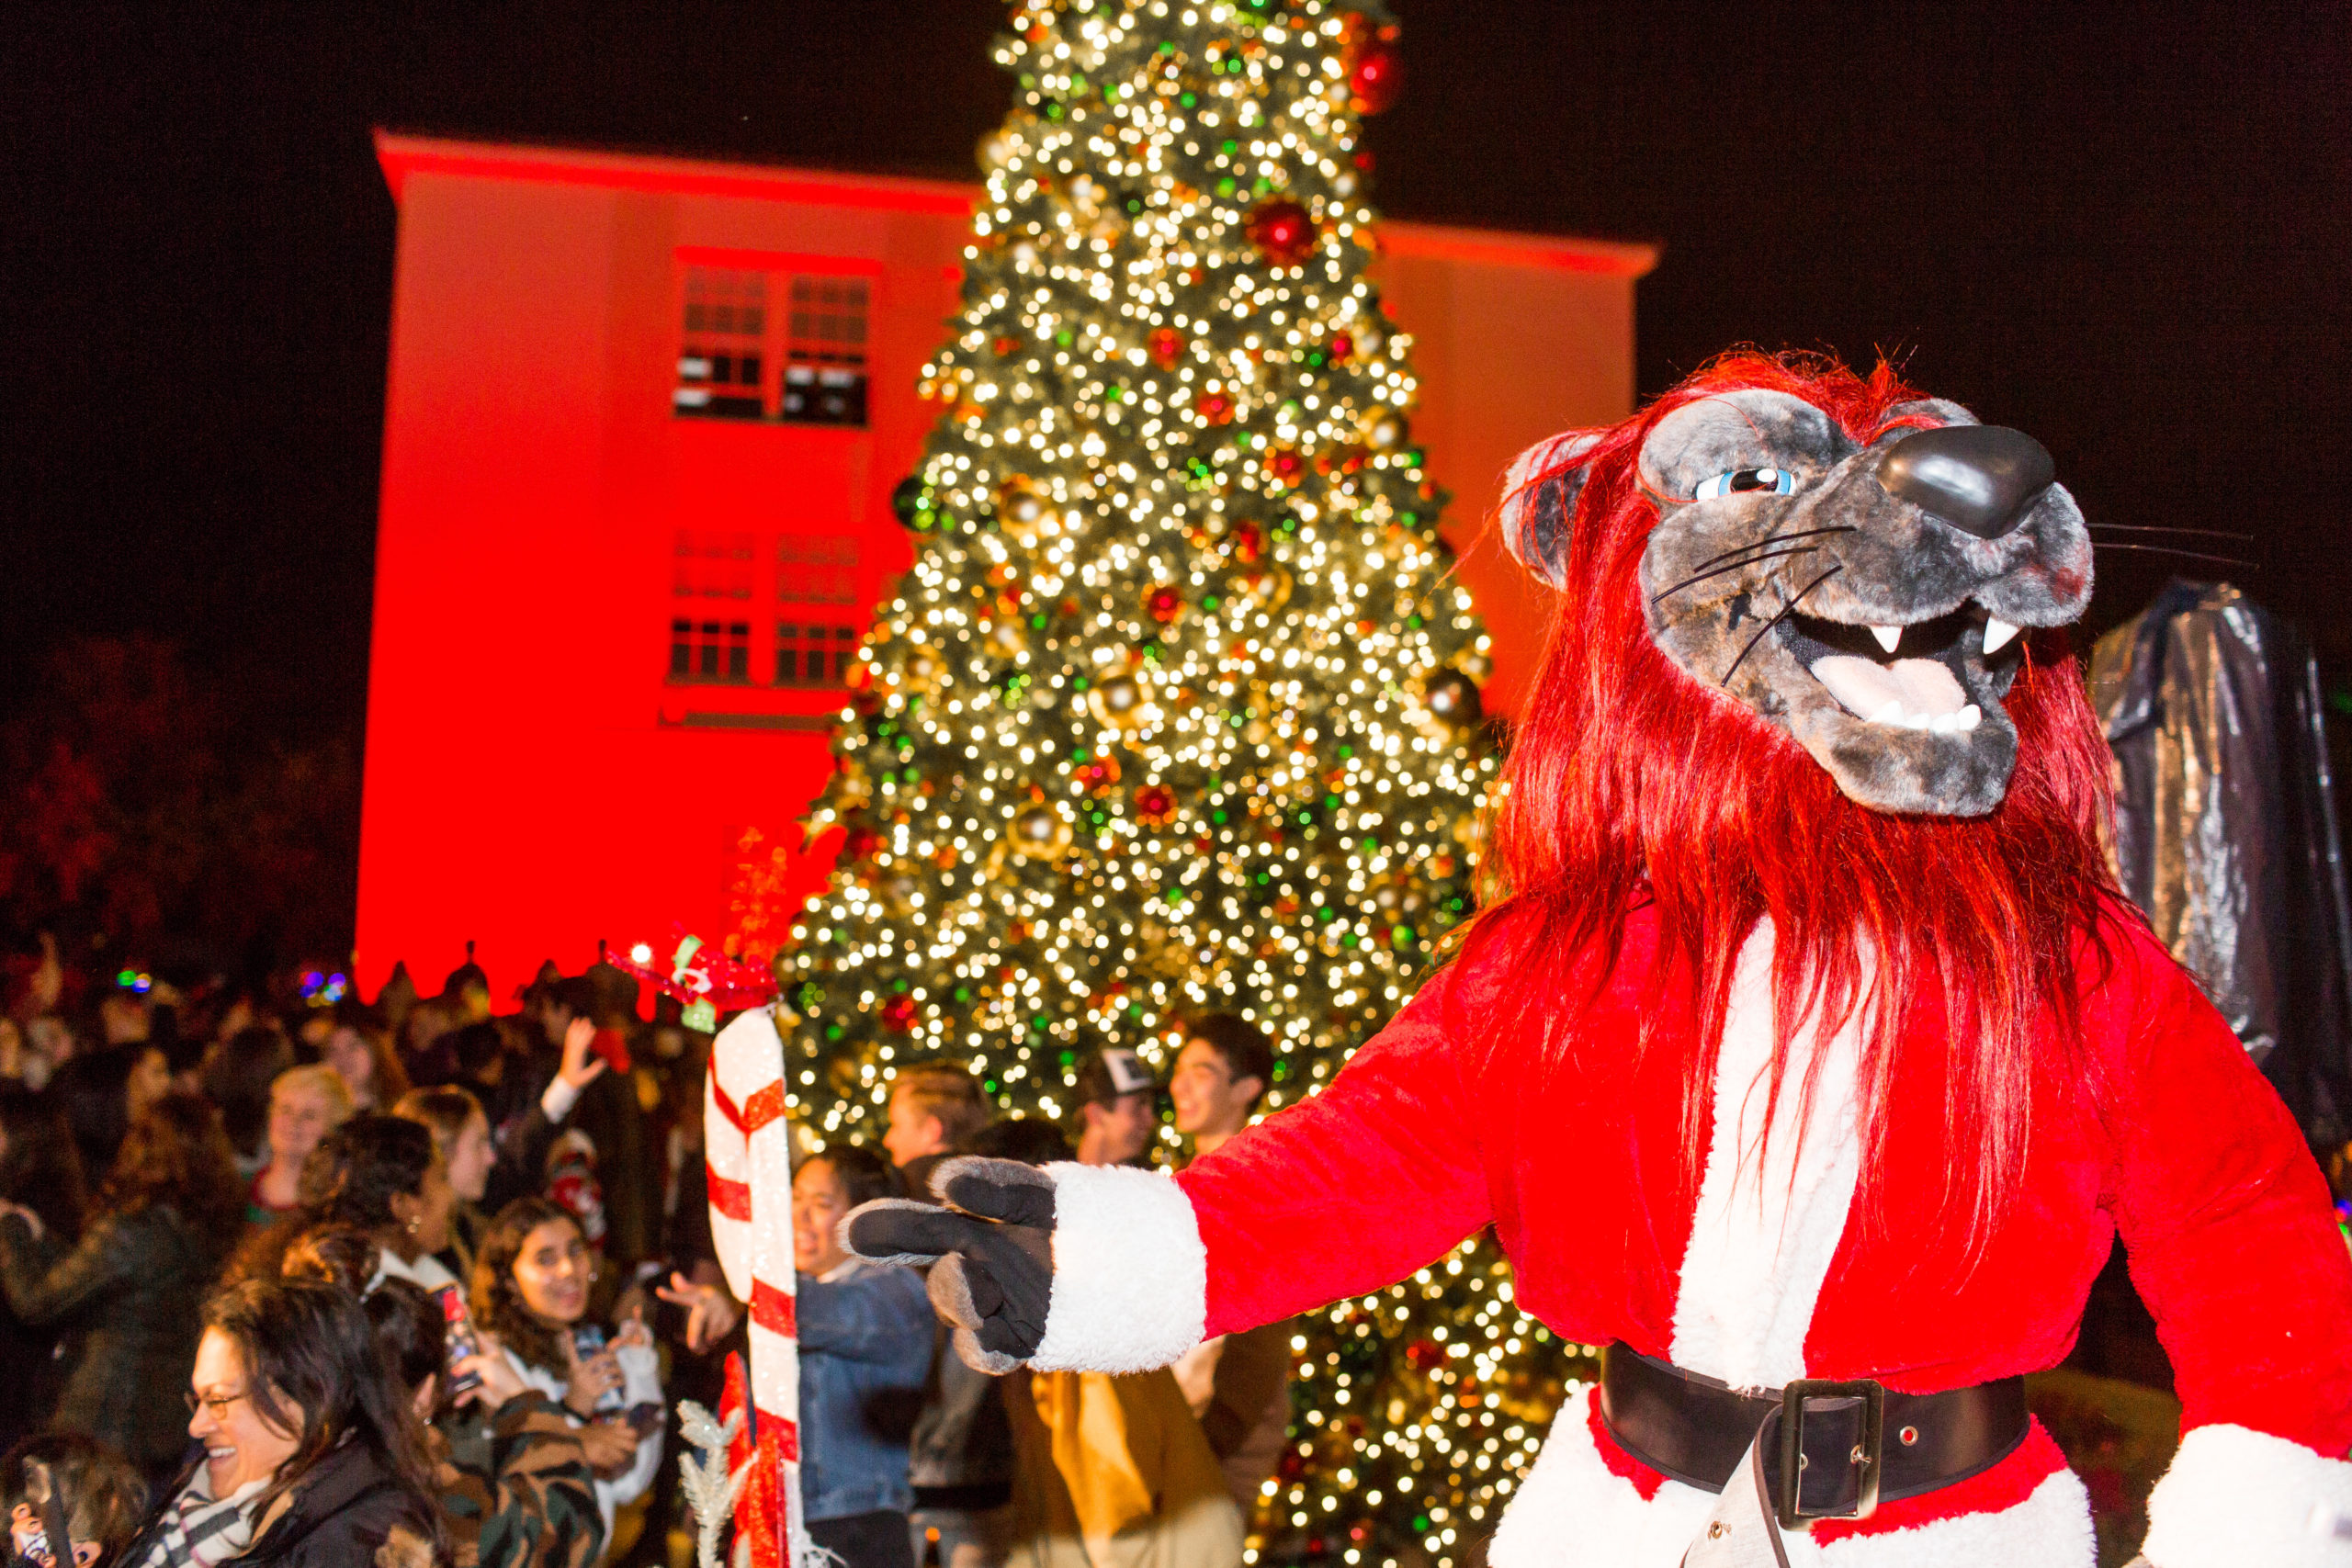 Iggy standing outside at night in front of the LMU Christmas Tree during the annual tree lighting event.